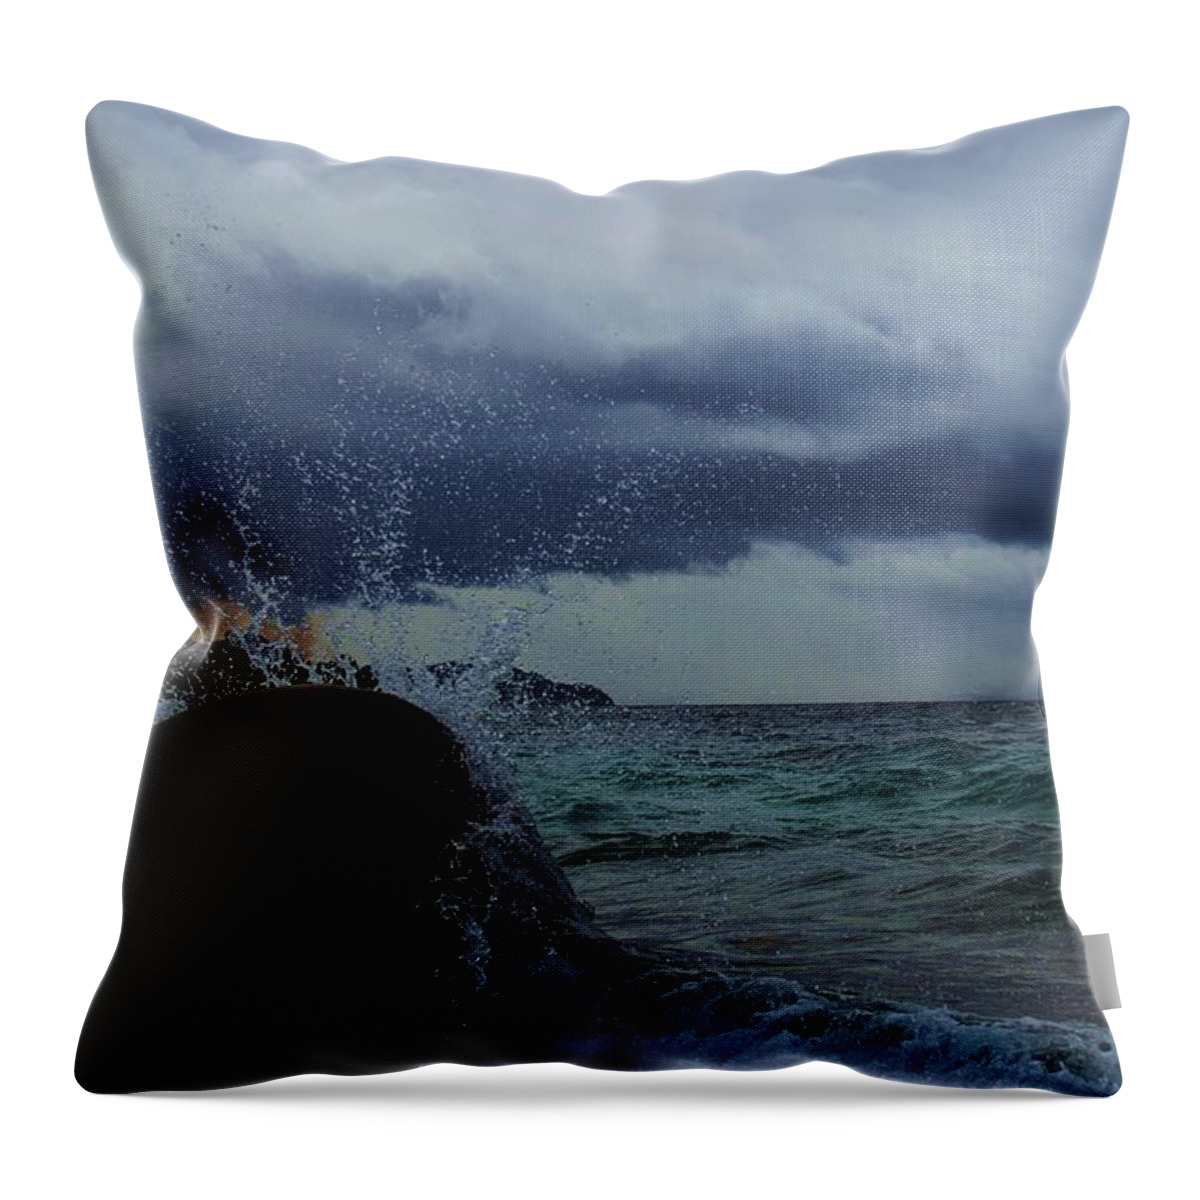 Lake Tahoe Throw Pillow featuring the photograph Get Splashed by Sean Sarsfield